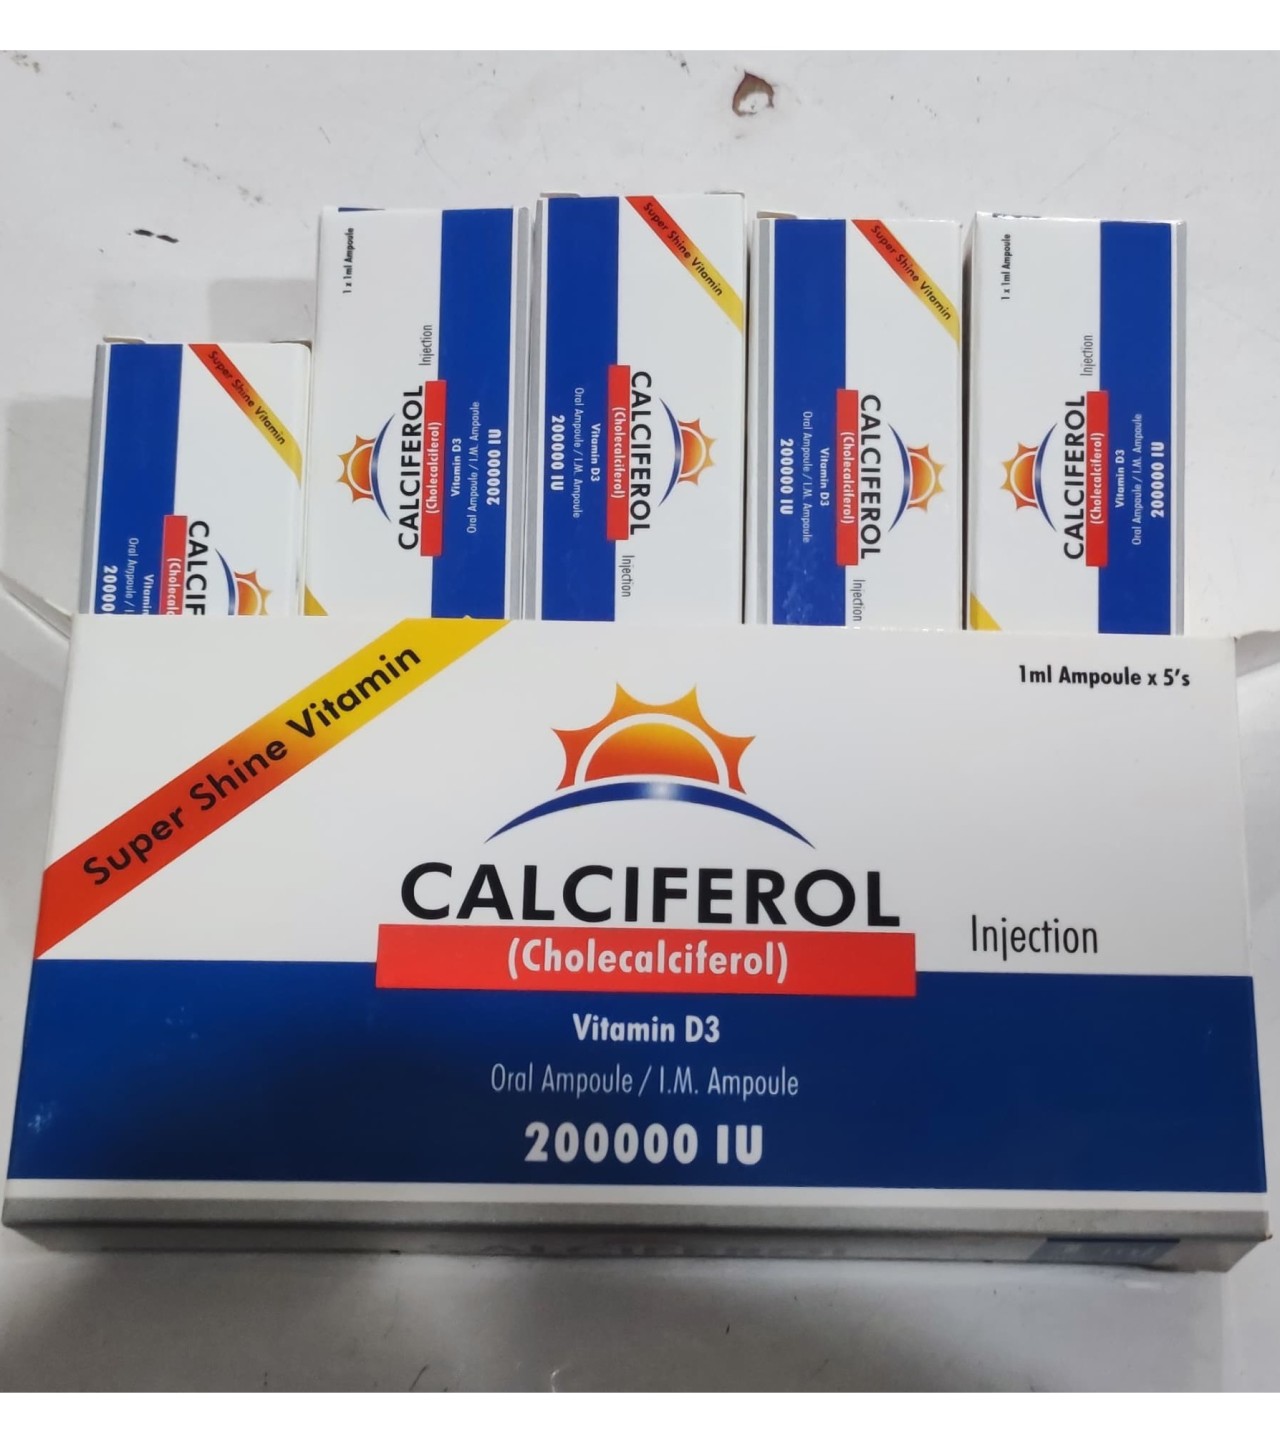 Calciferol injection vitamin D3 pack of 5 (5s)